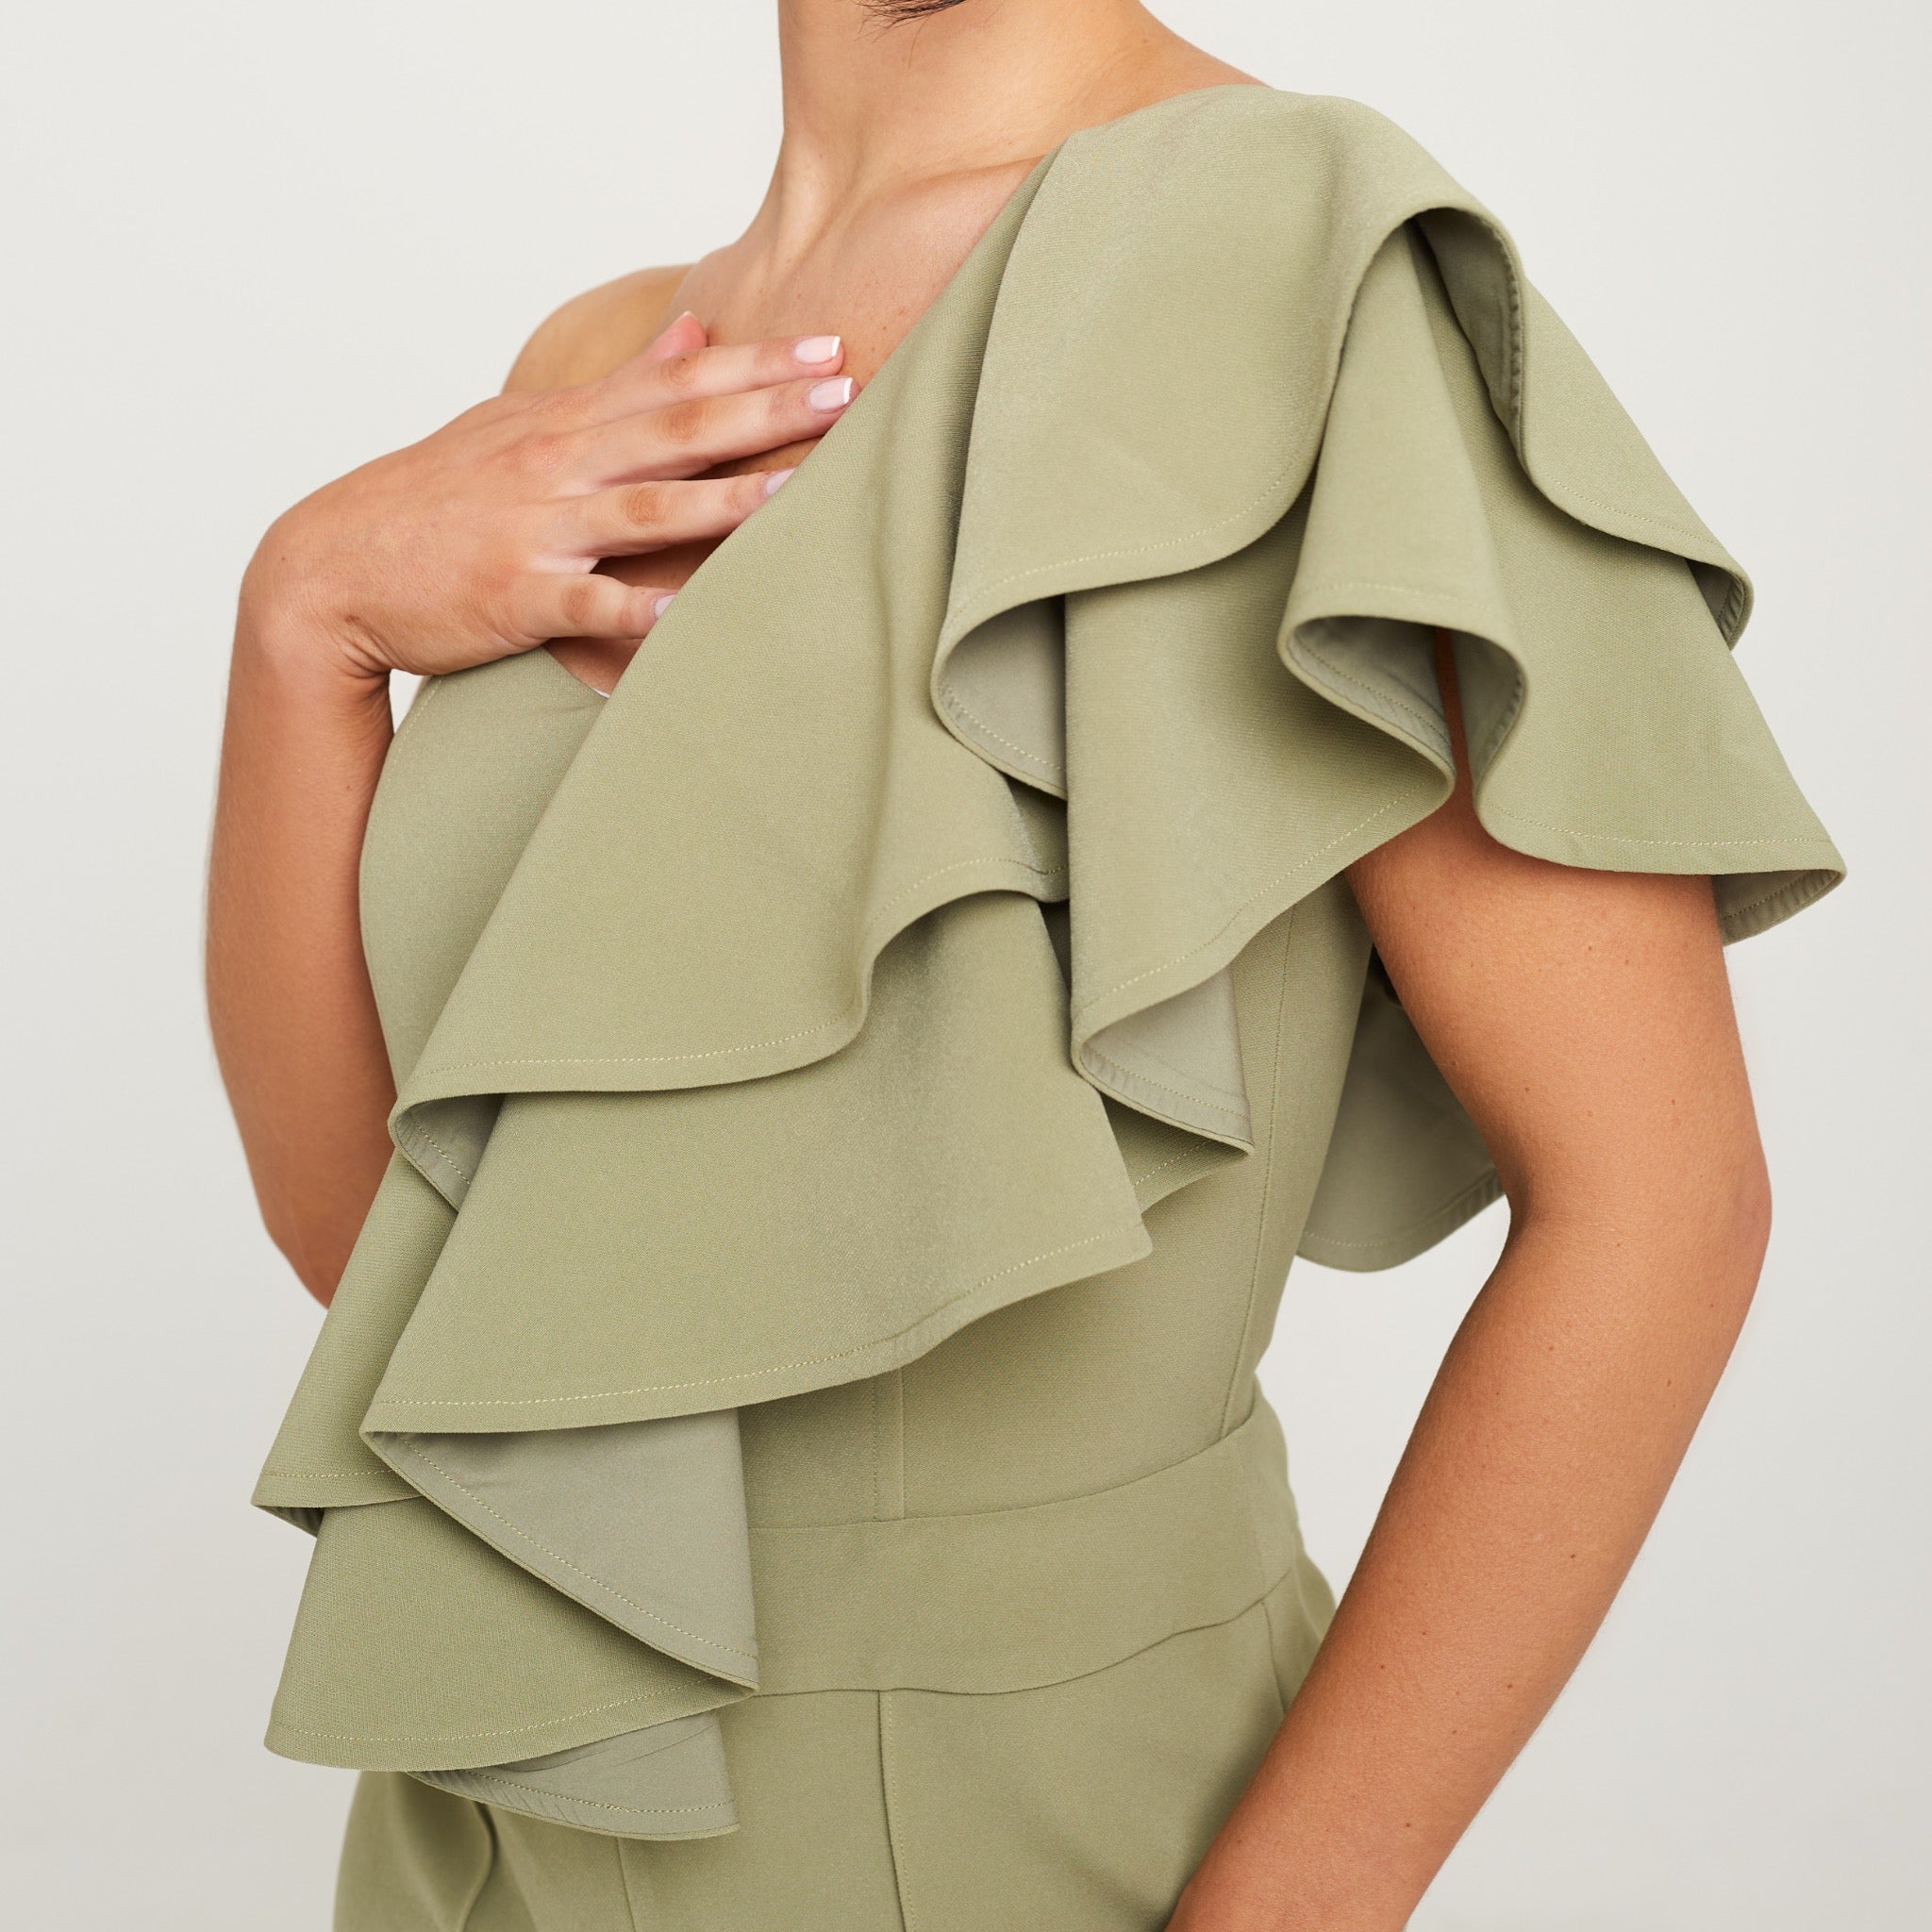 Cally Jane Beech, a woman with shoulder-length brunette hair, showcases a stylish sage green one-shoulder ruffle jumpsuit with cigarette trousers. The jumpsuit features a single shoulder strap, creating an asymmetrical neckline, while the ruffle detail cascades elegantly down the bodice, adding a feminine and playful touch. The jumpsuit's sleek cigarette trousers fit snugly and taper down to the ankles, creating a streamlined and polished look.